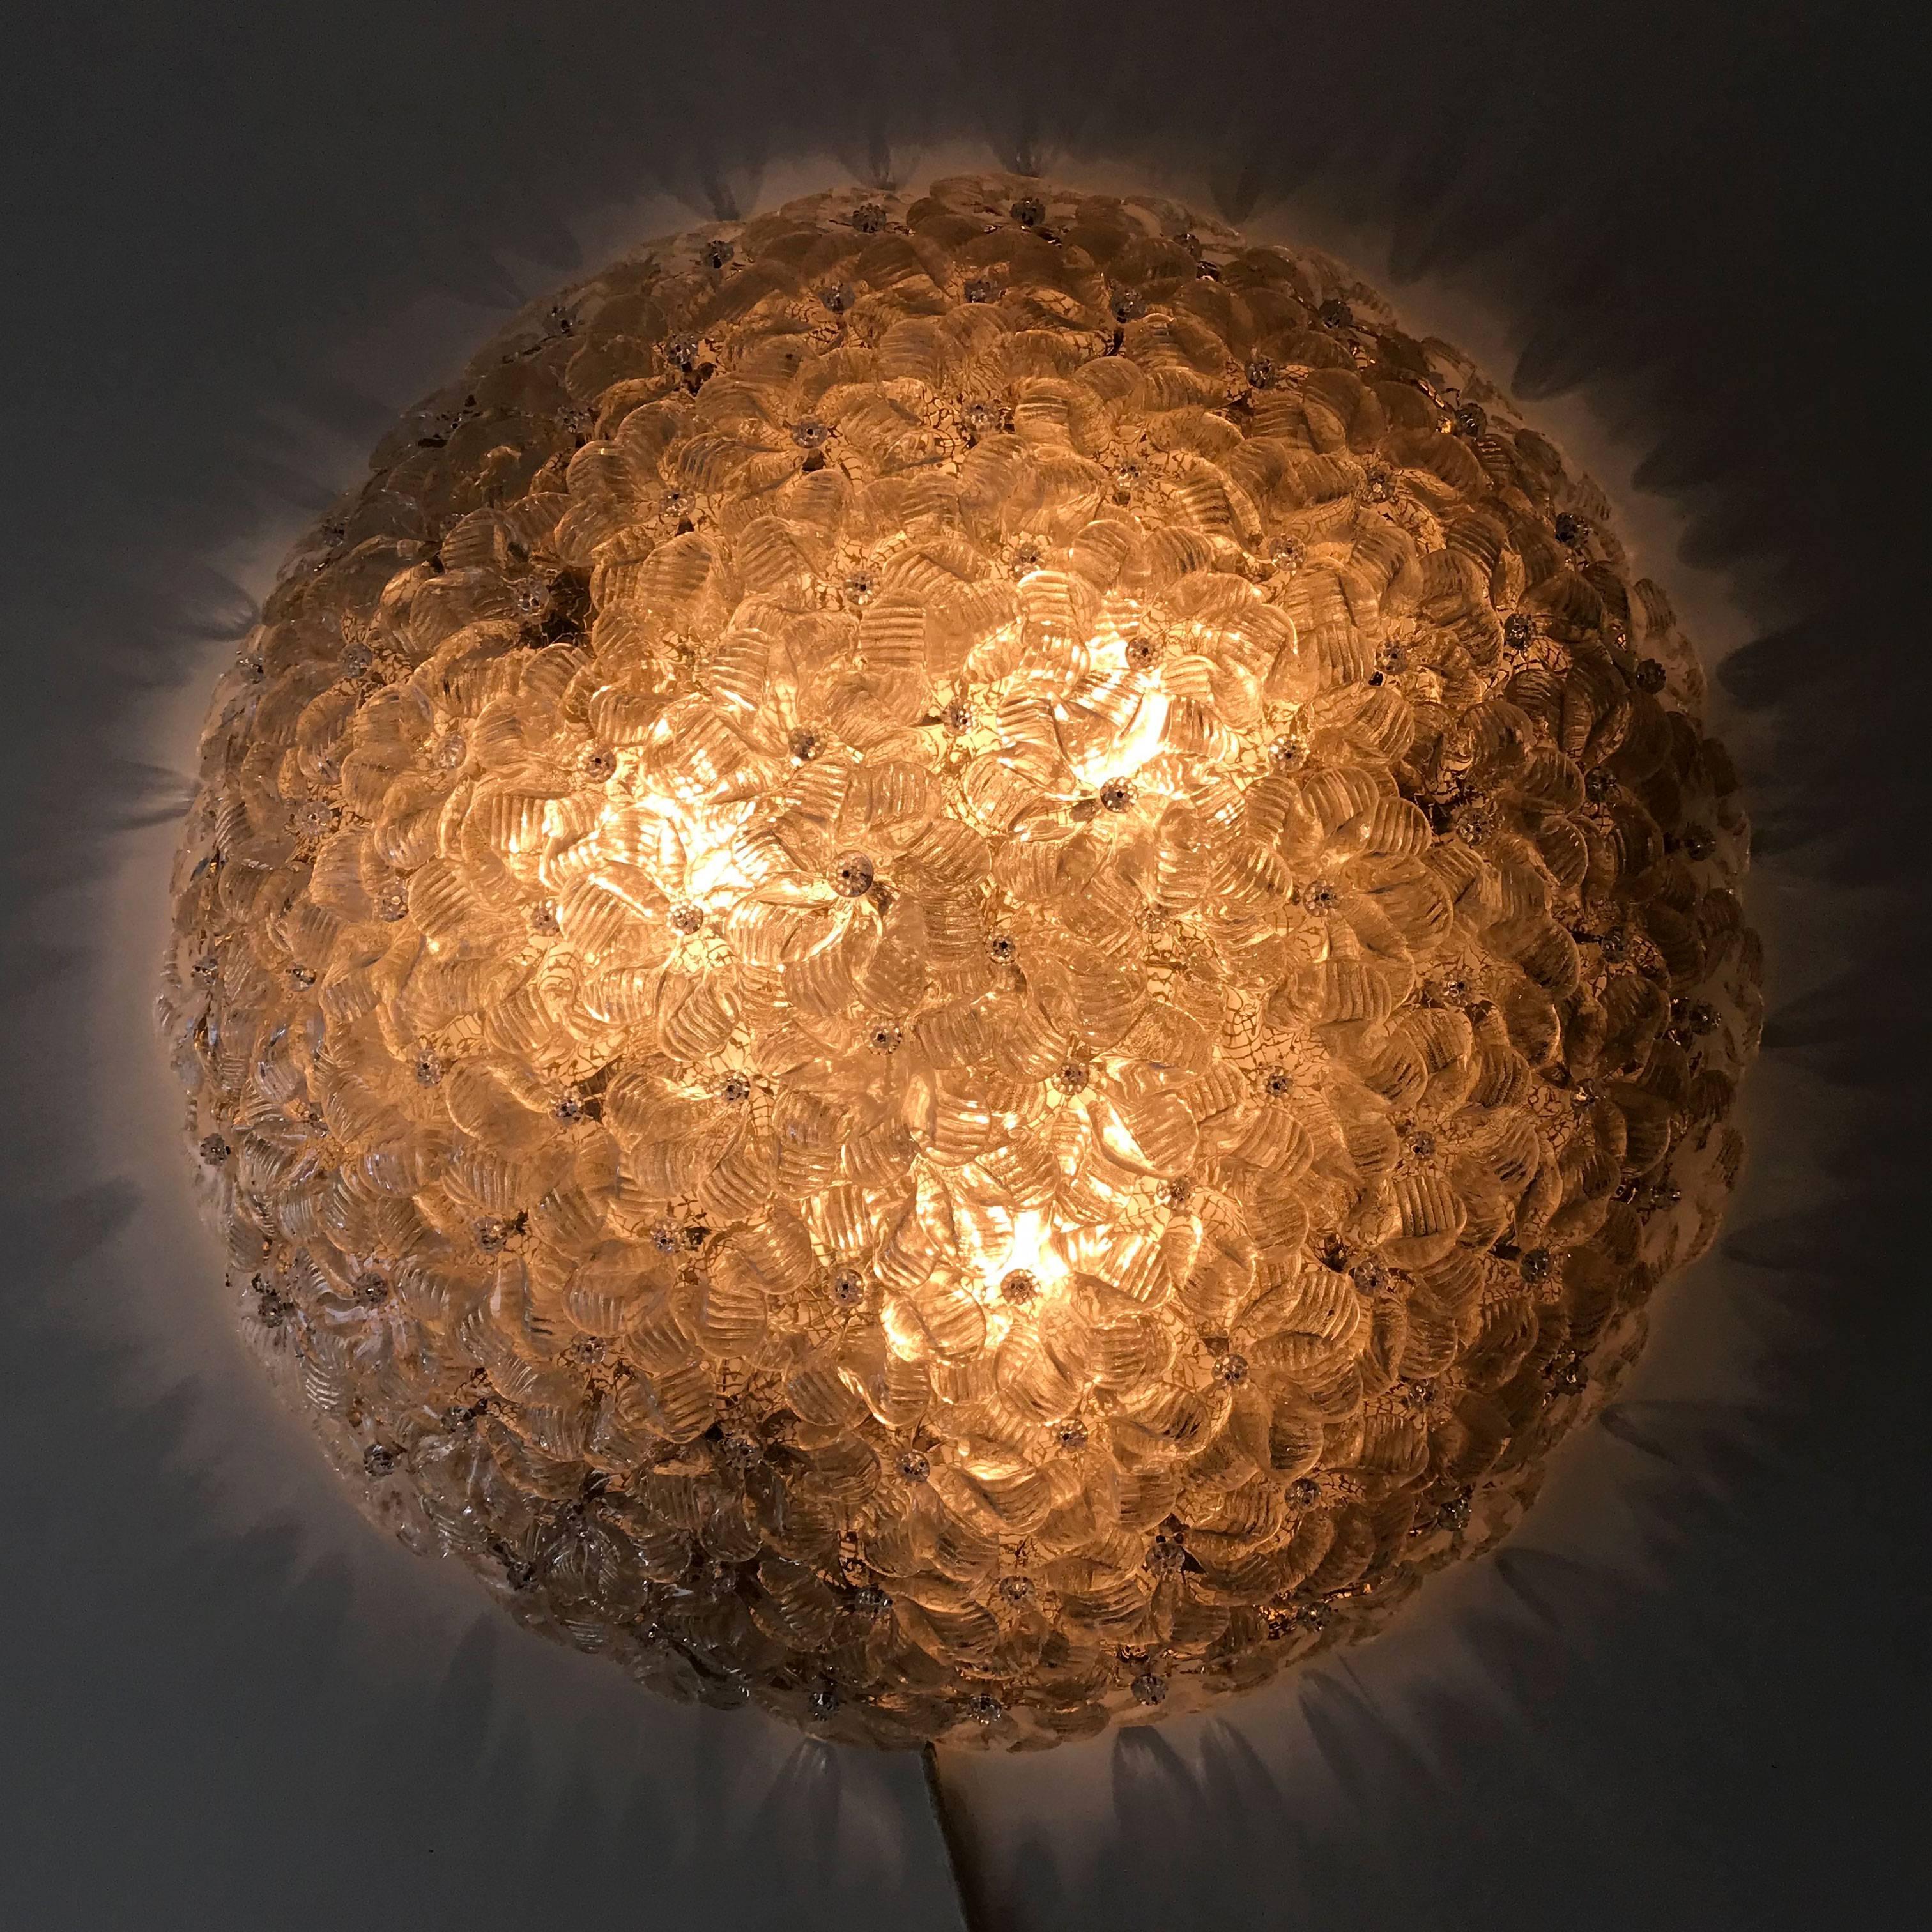 Decorative and rare Mid-Century Modern Italian flush mount ceiling fixture or wall lamp from circa 1960s. Manufactured by Barovier & Toso, Italy. The lamp consists of numerous Murano glass flowers with gold inclusions.
The lamp is executed with